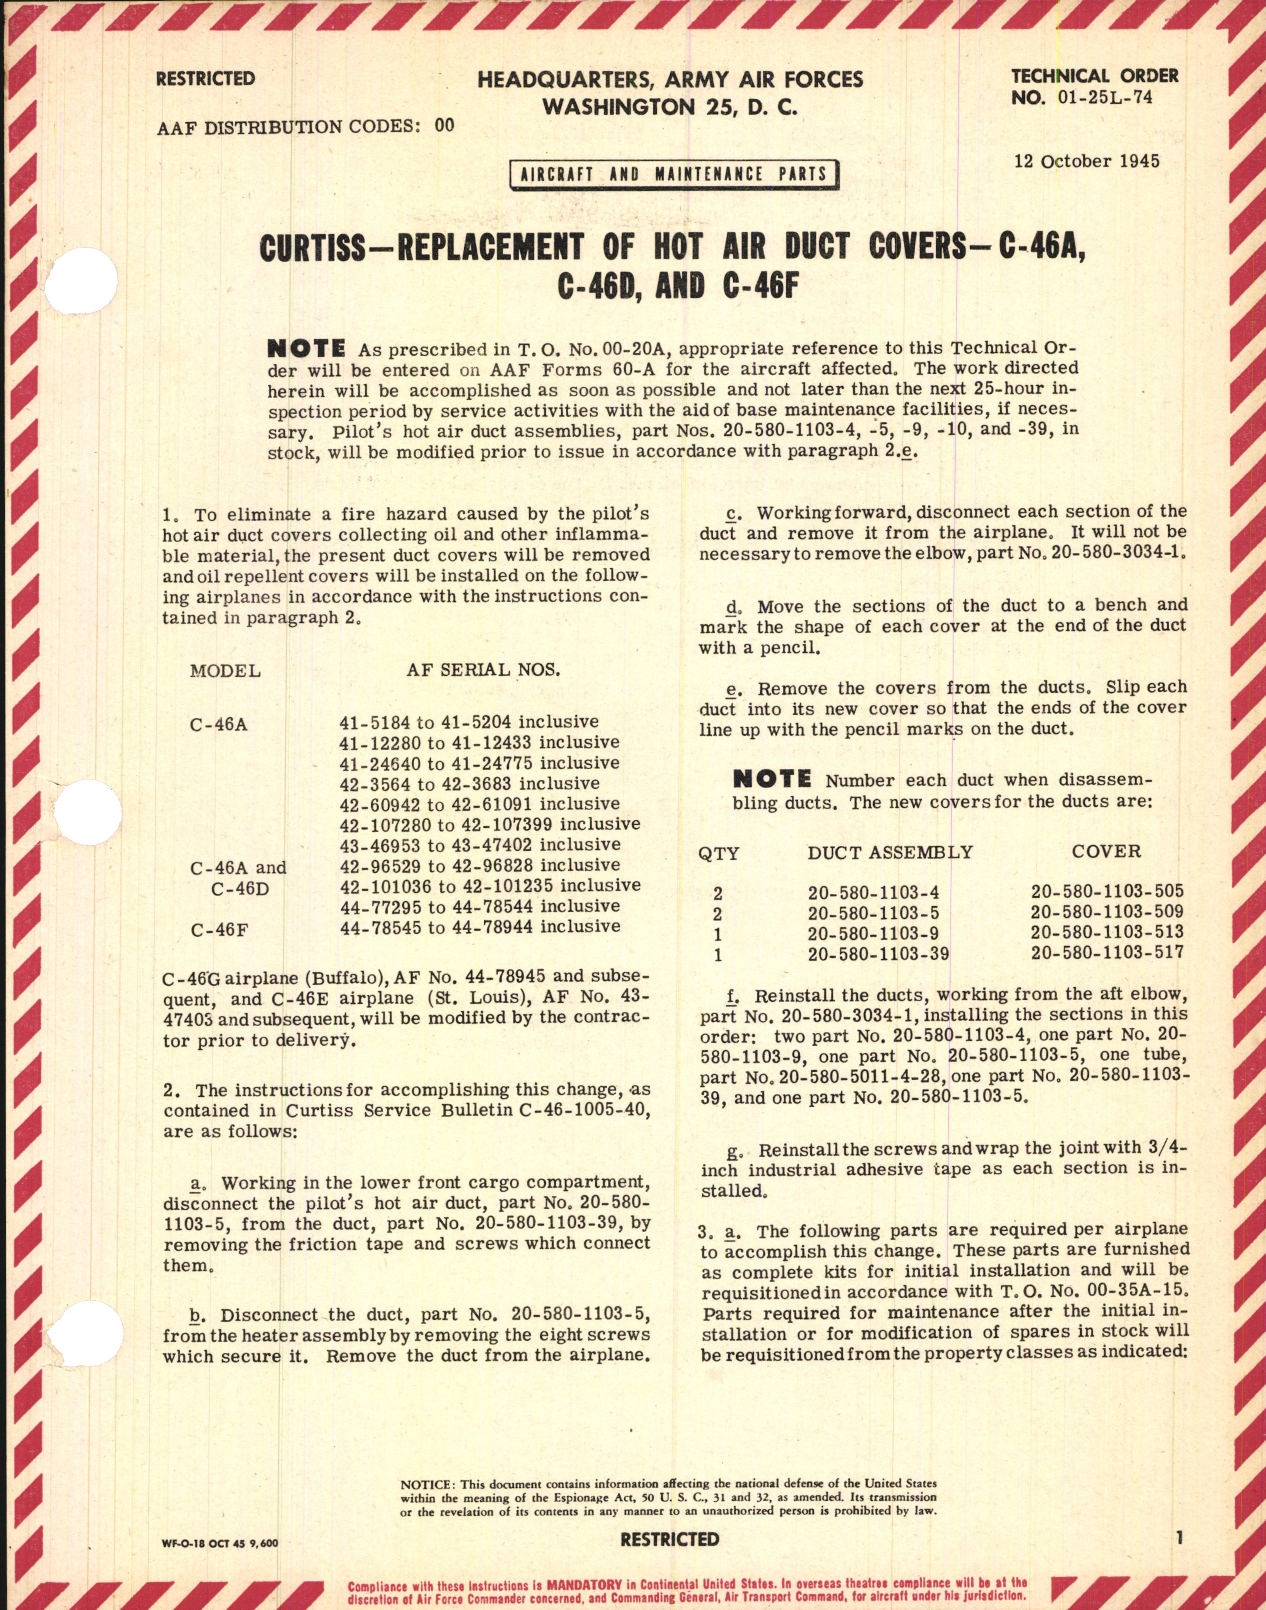 Sample page 1 from AirCorps Library document: Replacement Of Hot Air Duct Covers for C-46A, C-46D, and C-46F